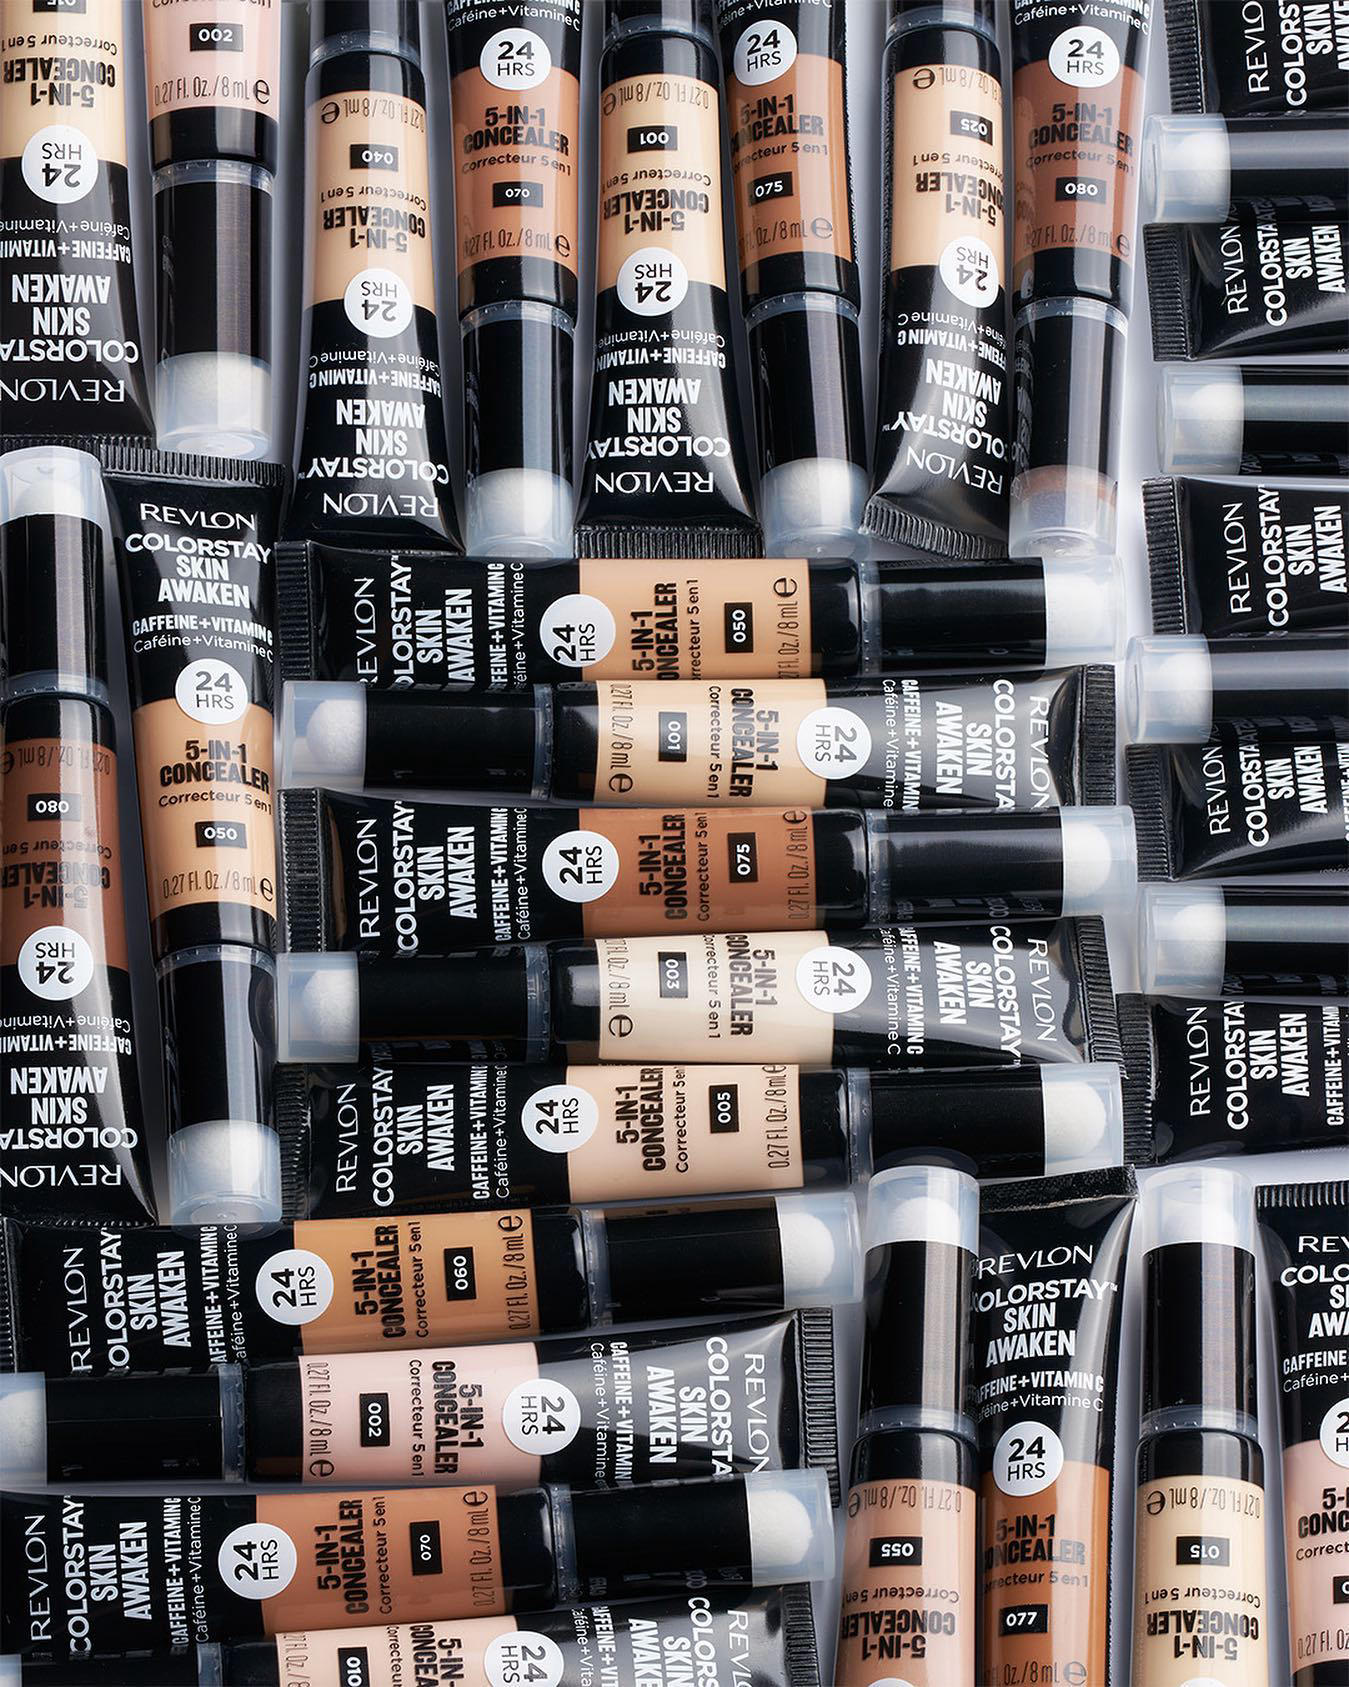 image  1 Revlon - Our #ColorStay Skin Awaken Concealer is basically 5 presents in one